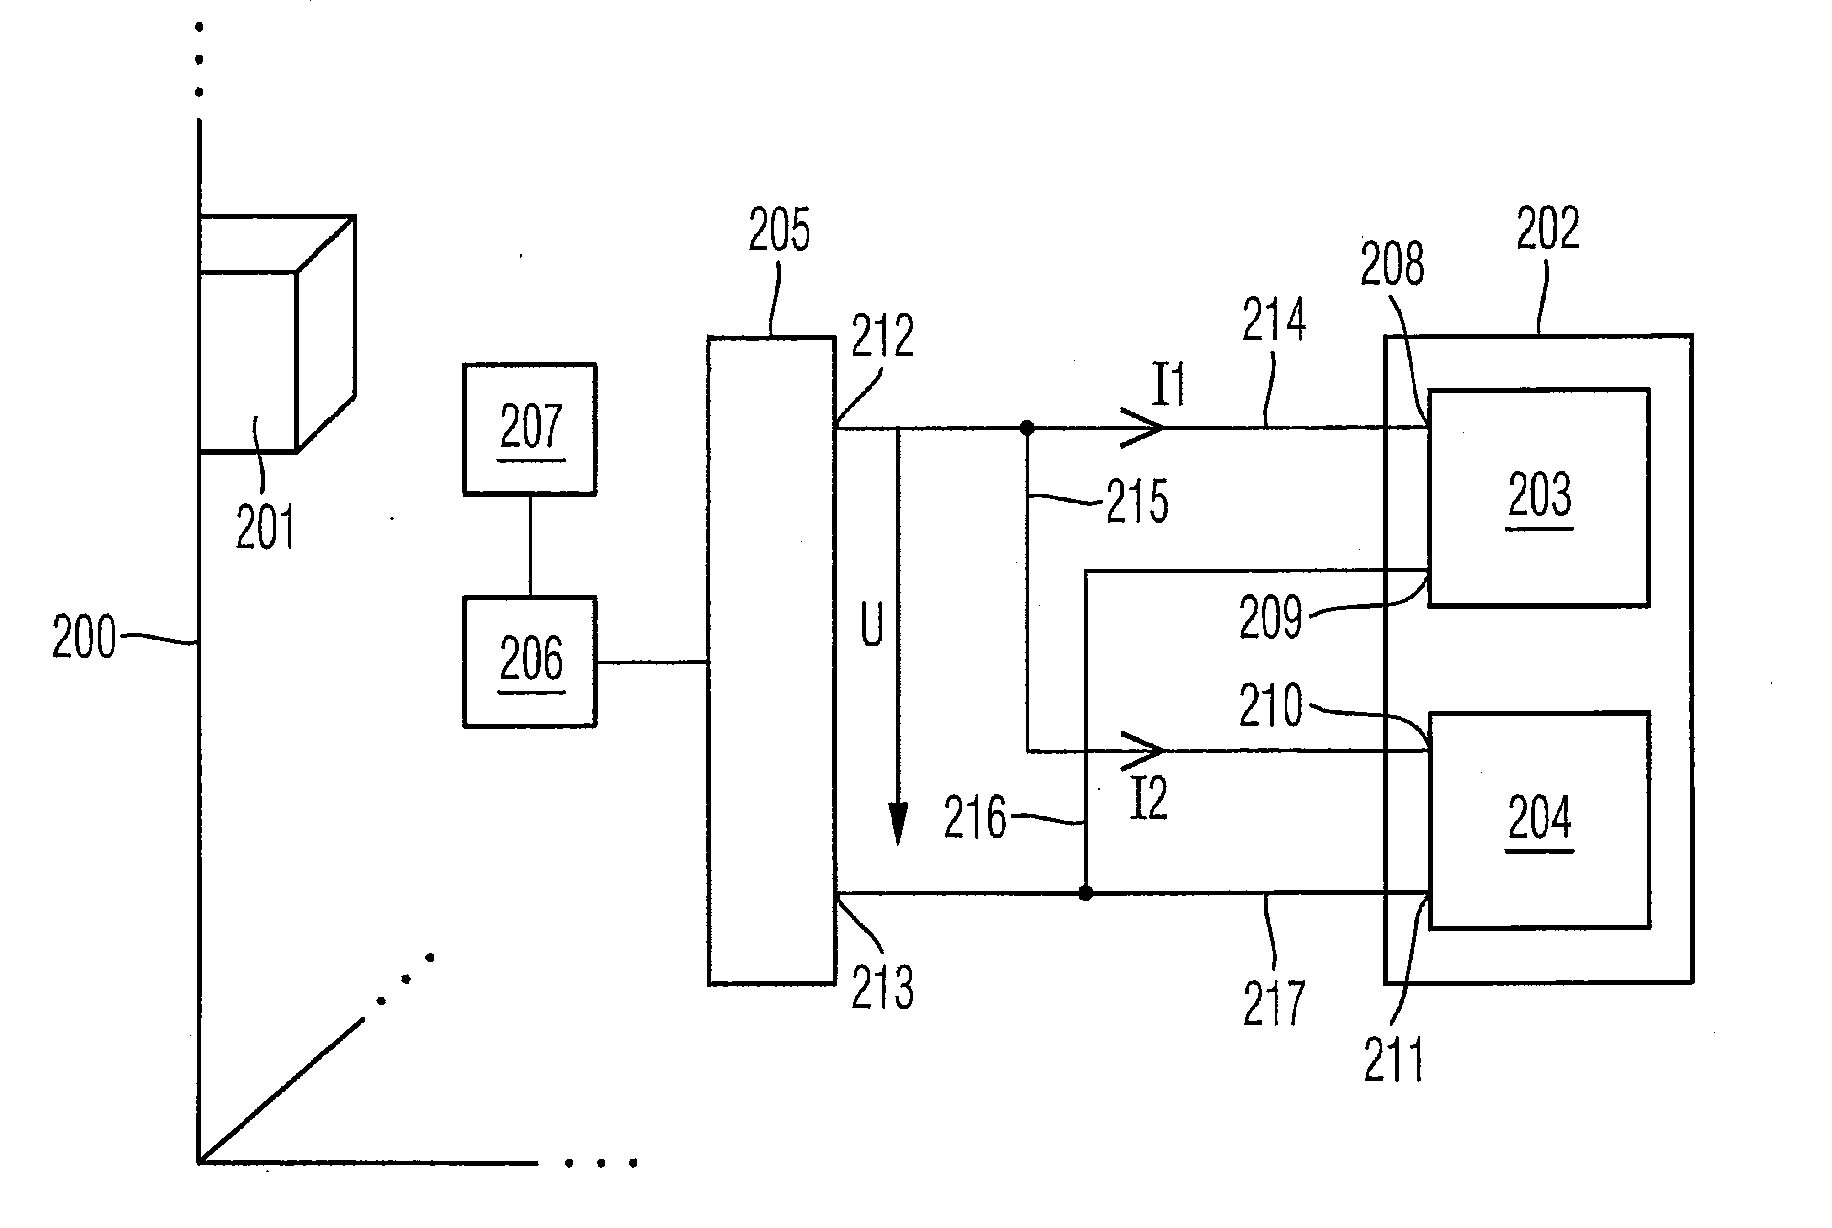 System and Methods for Monitoring a Thermoelectric Heating and Cooling Device